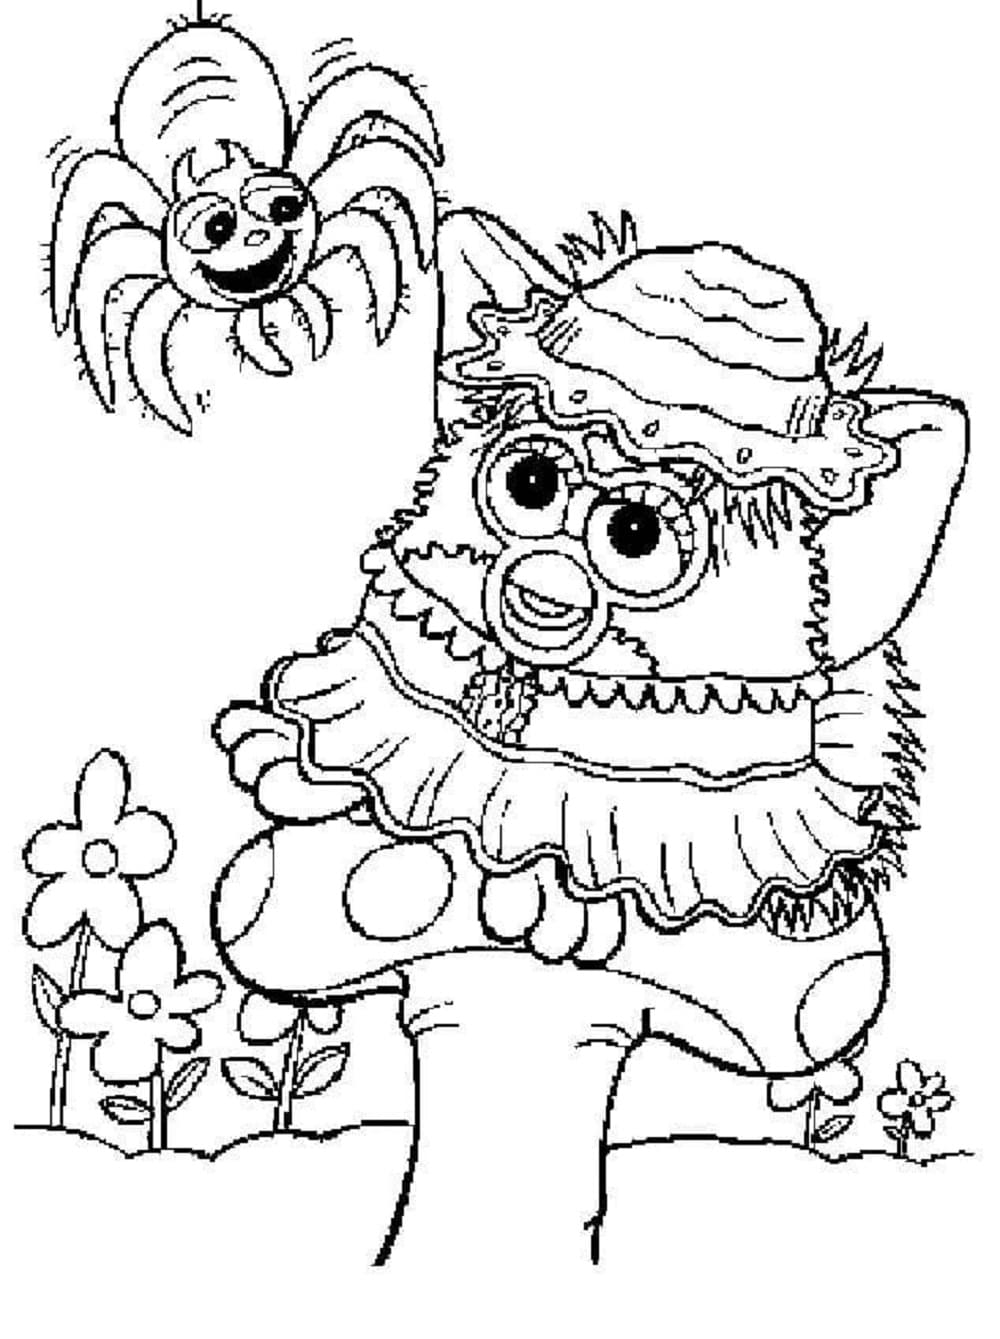 Printable Furby and Spider Coloring Page